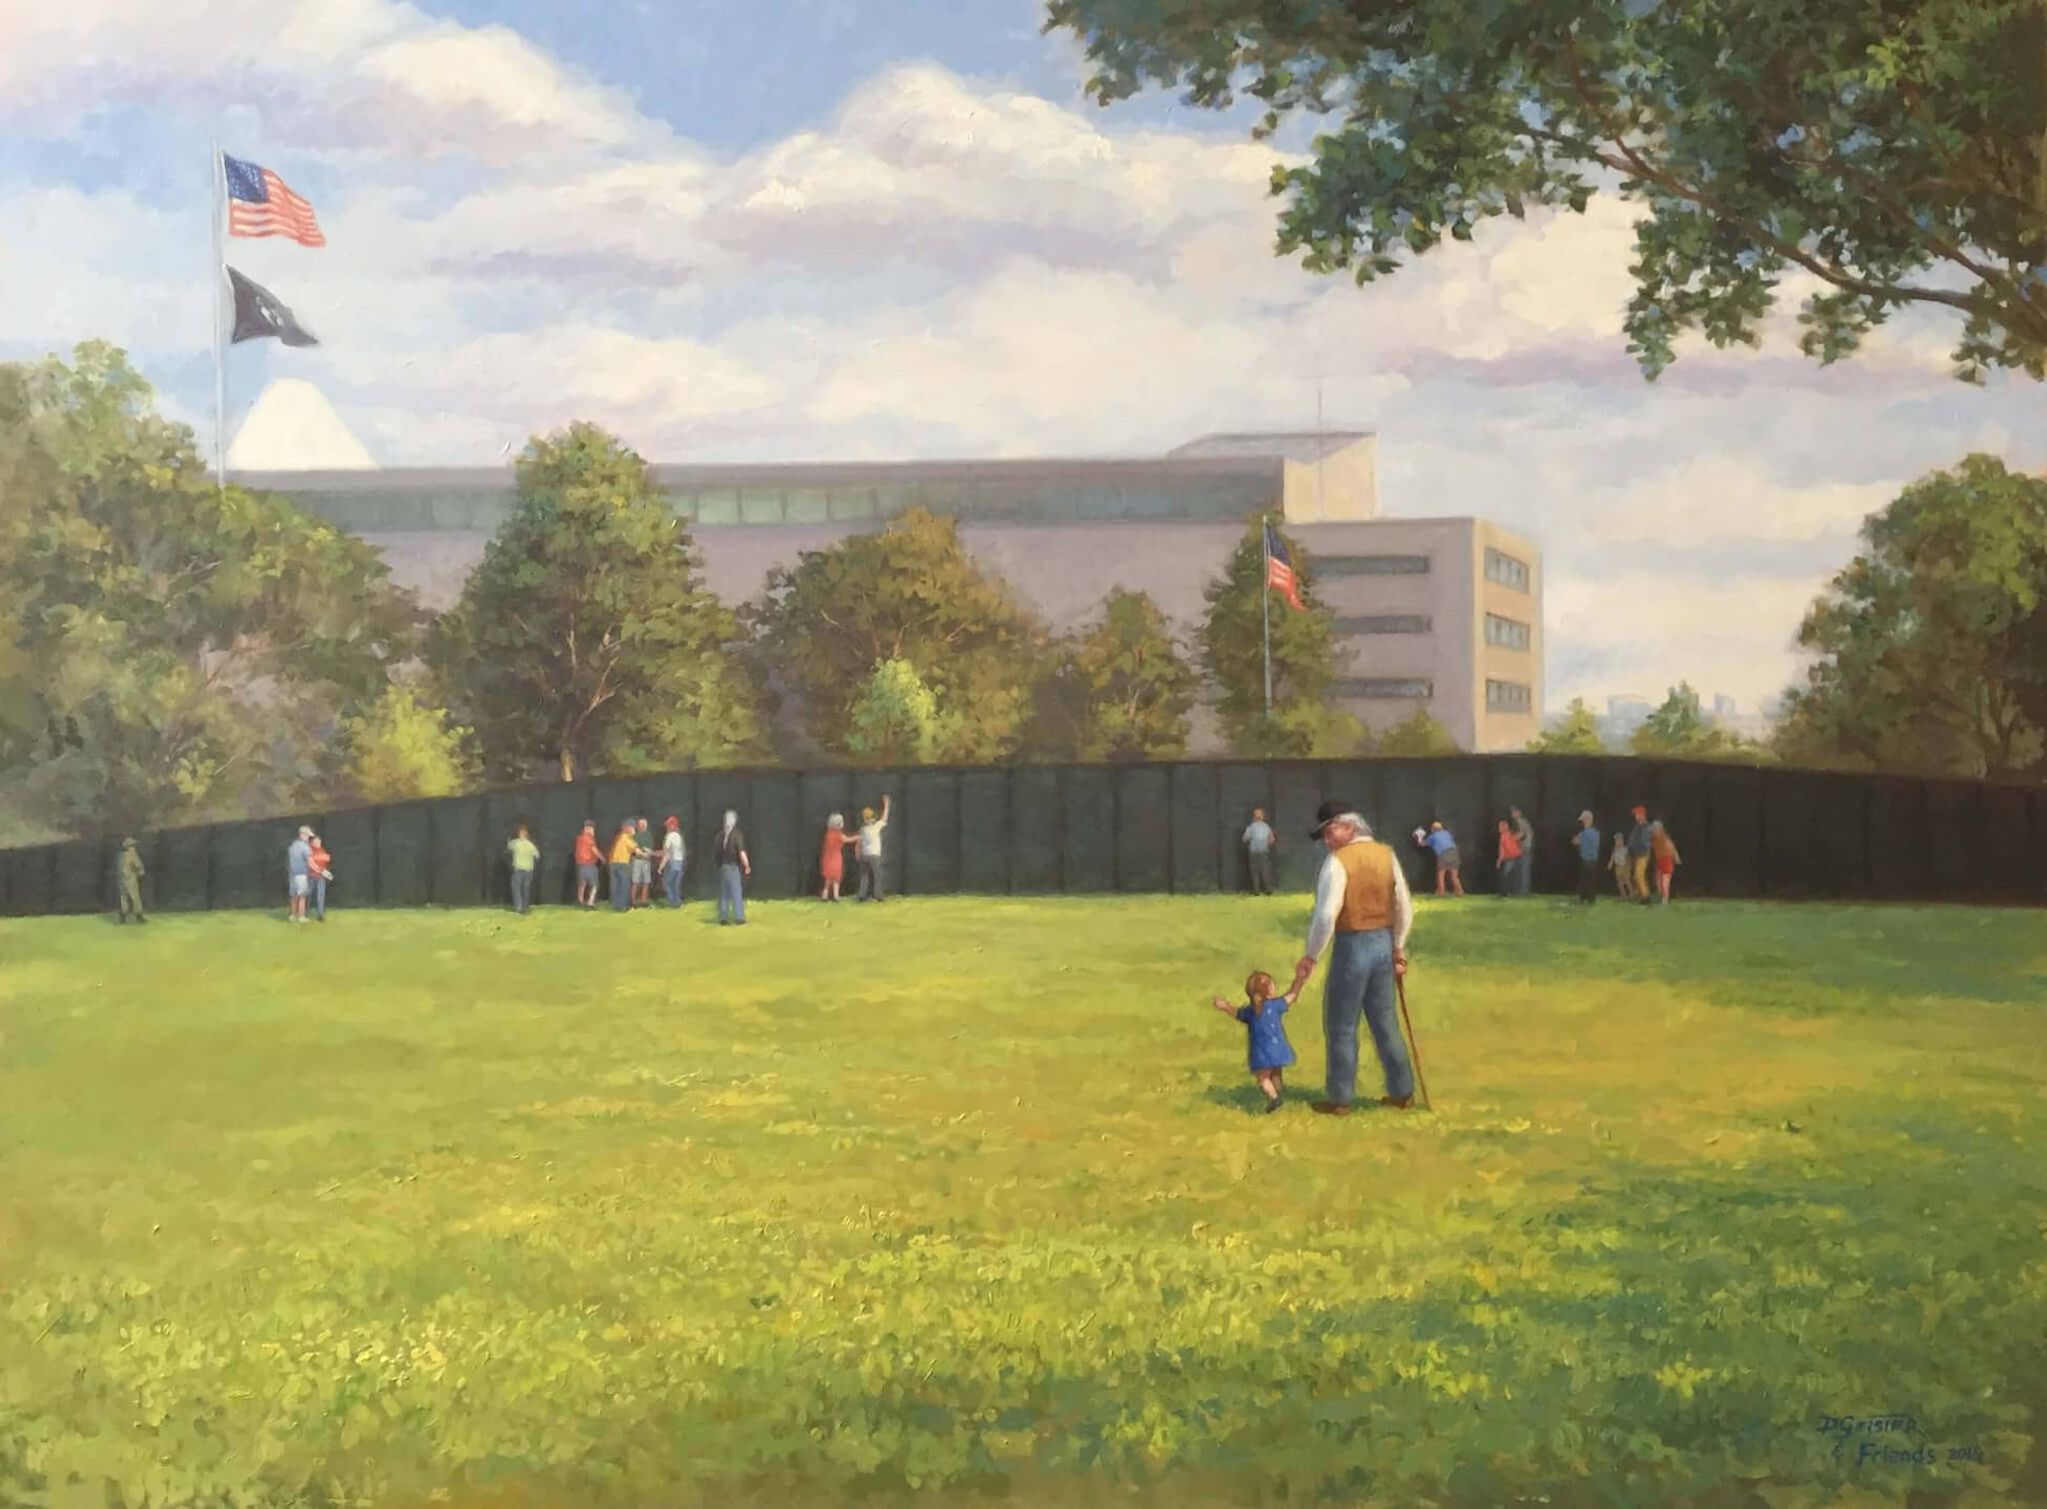 "The Wall That Heals" oil painting by David Geister and Friends.